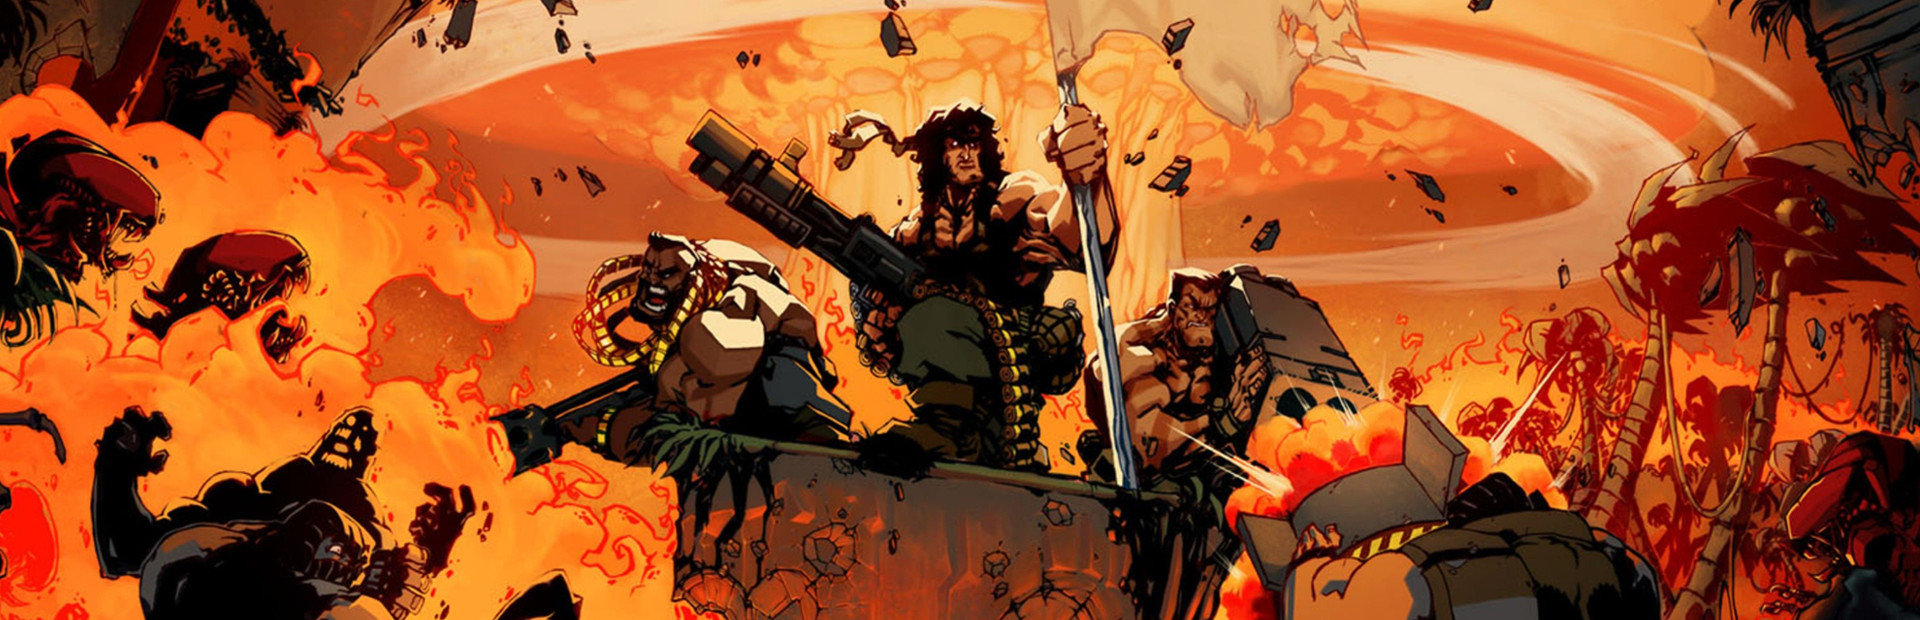 Broforce cover image